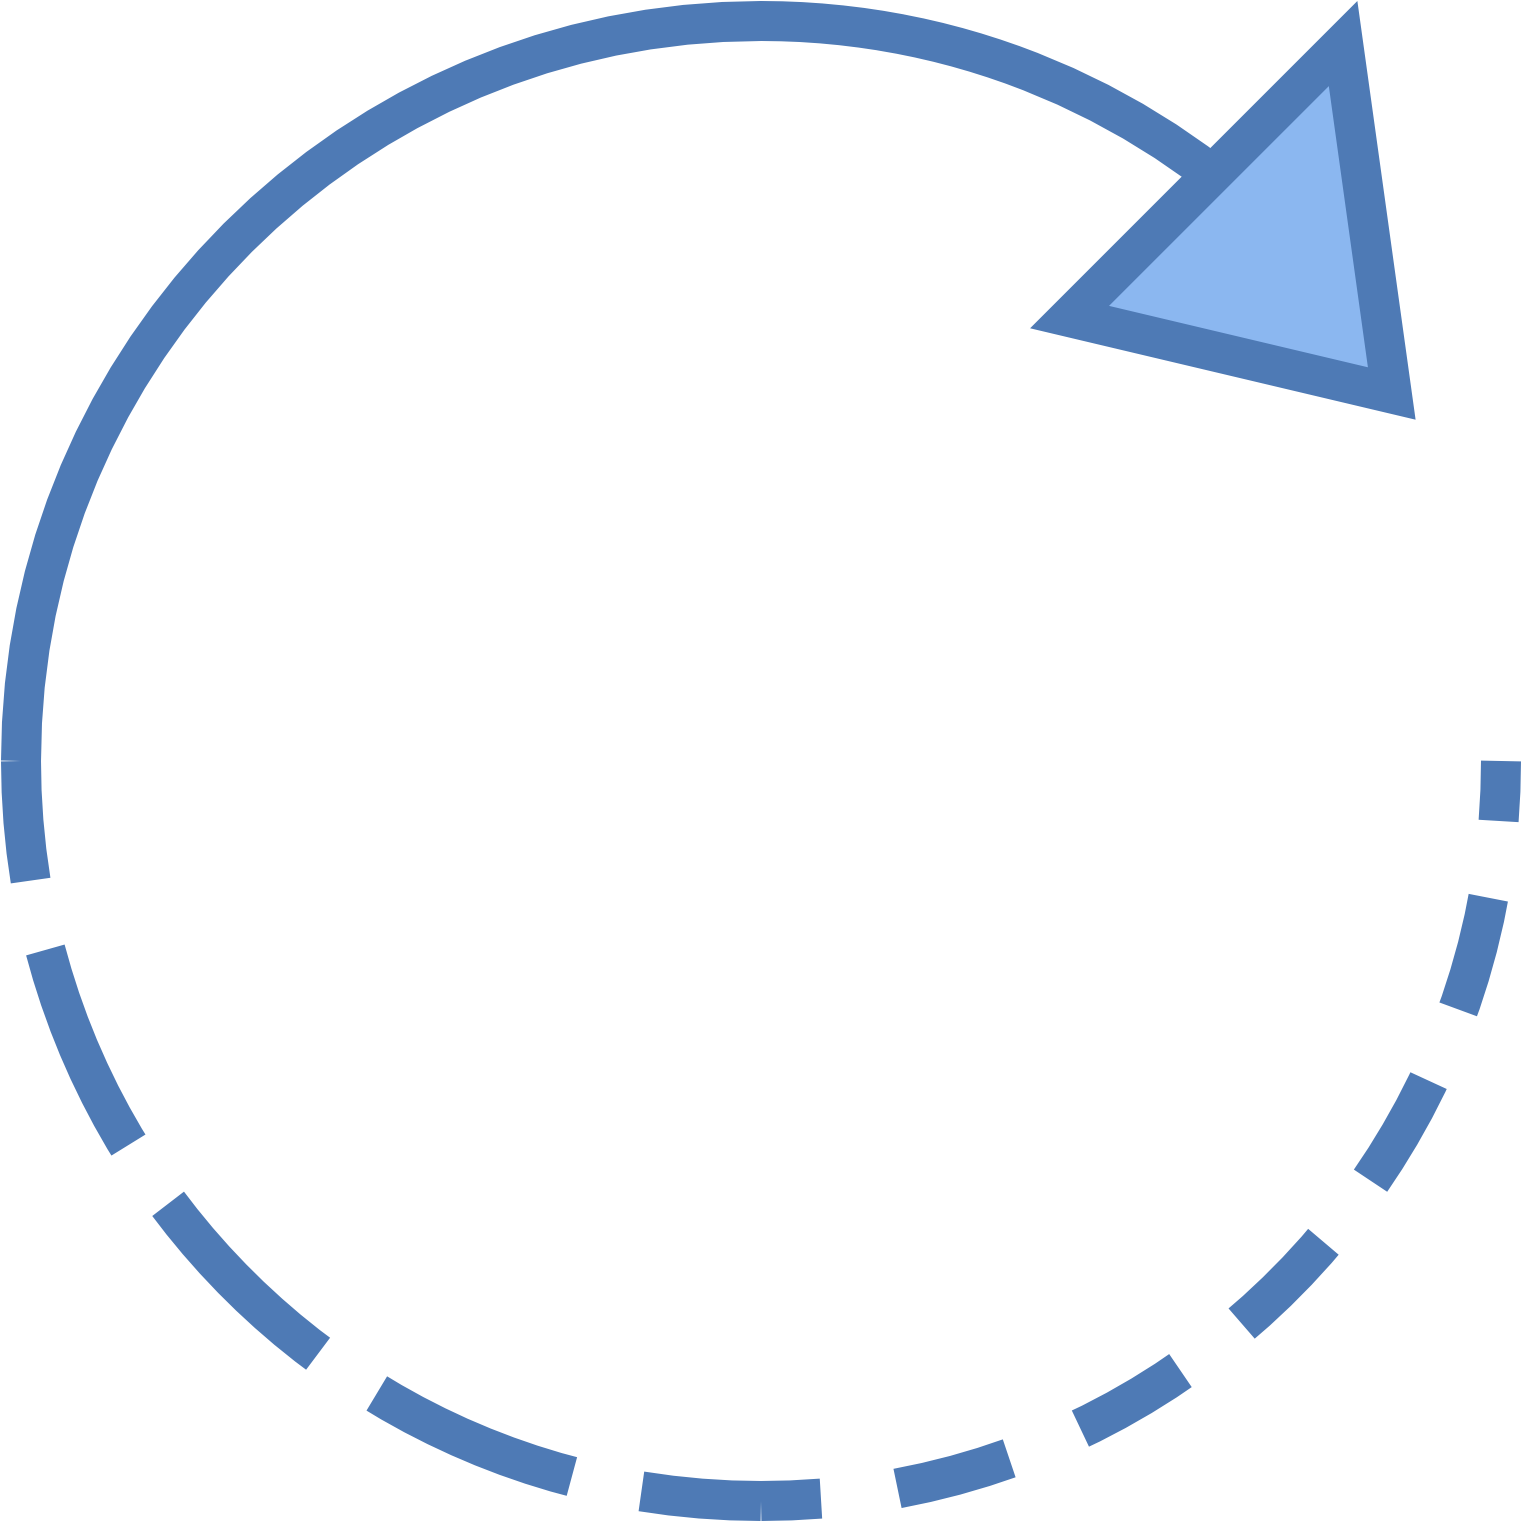 A Blue Arrow Pointing To A Circle